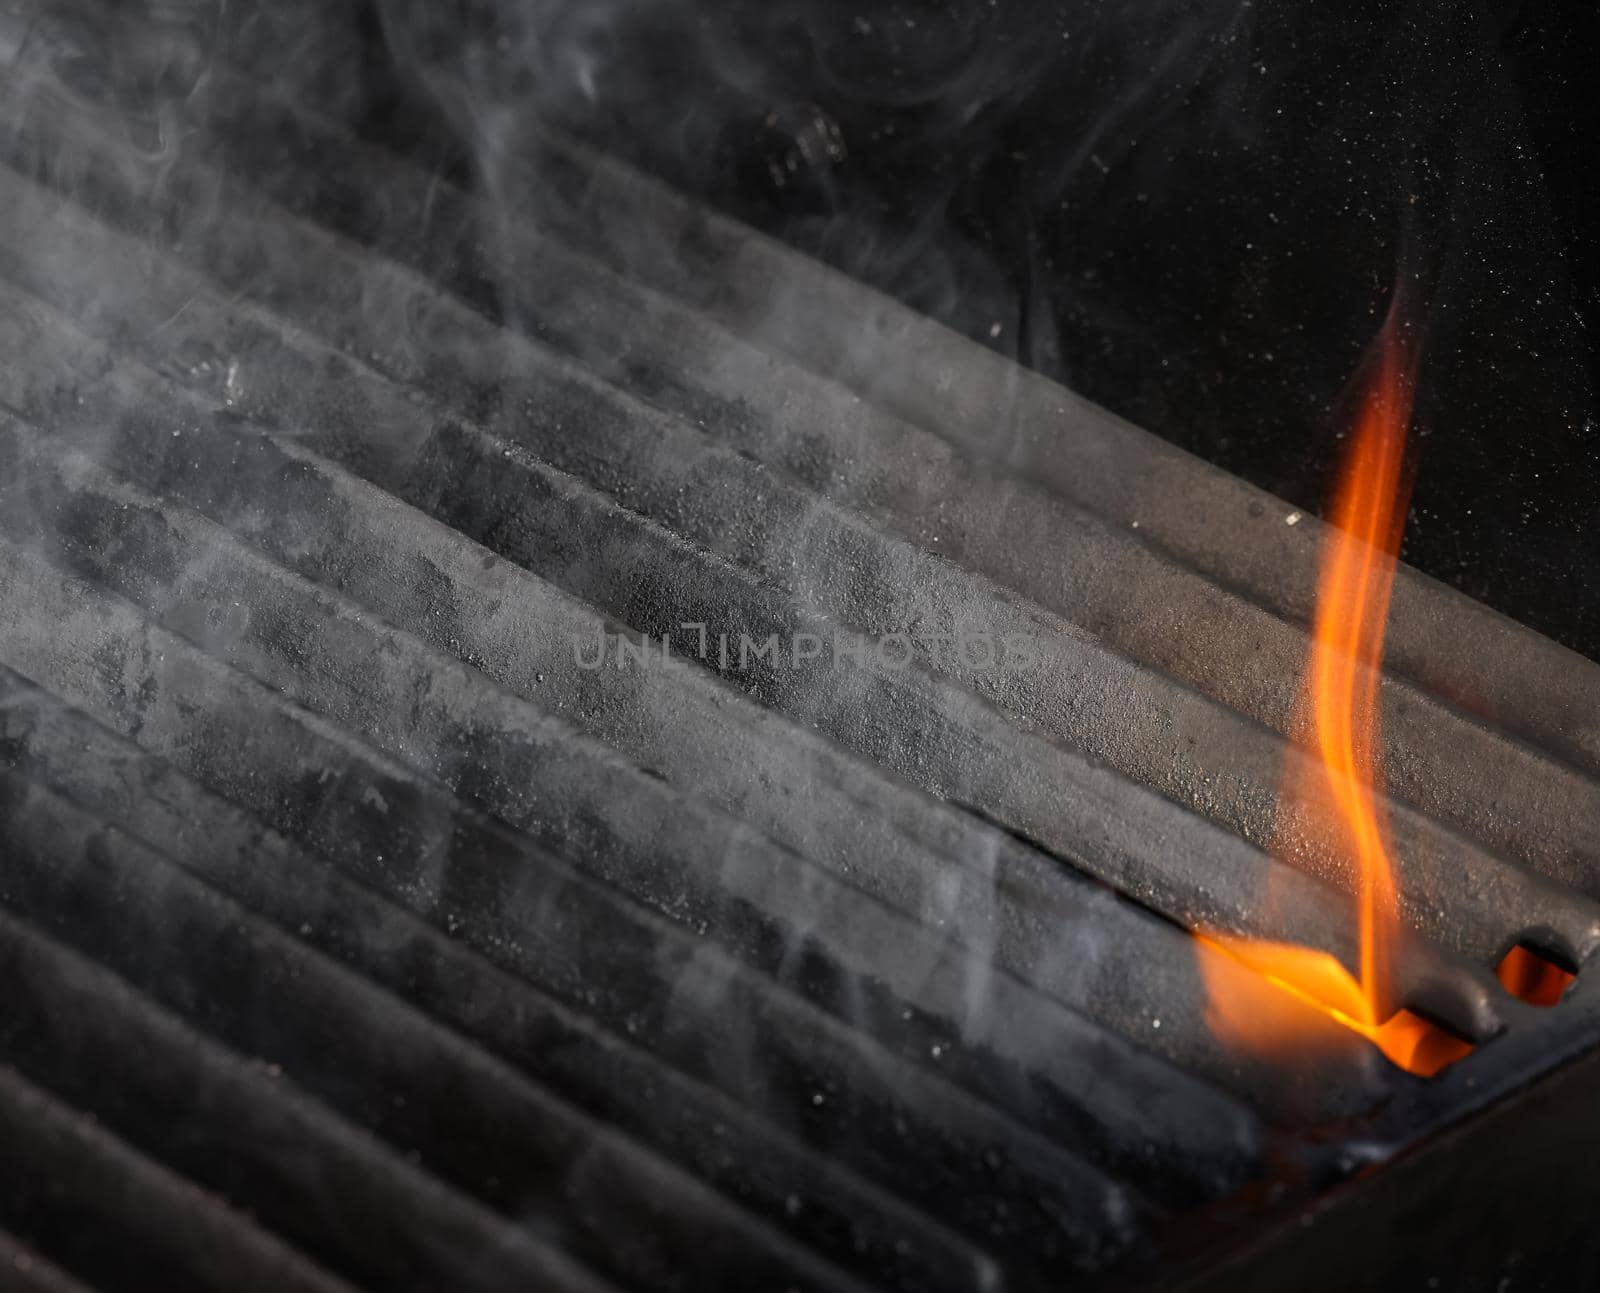 Cast iron metal grill grate with fire and smoke by BreakingTheWalls